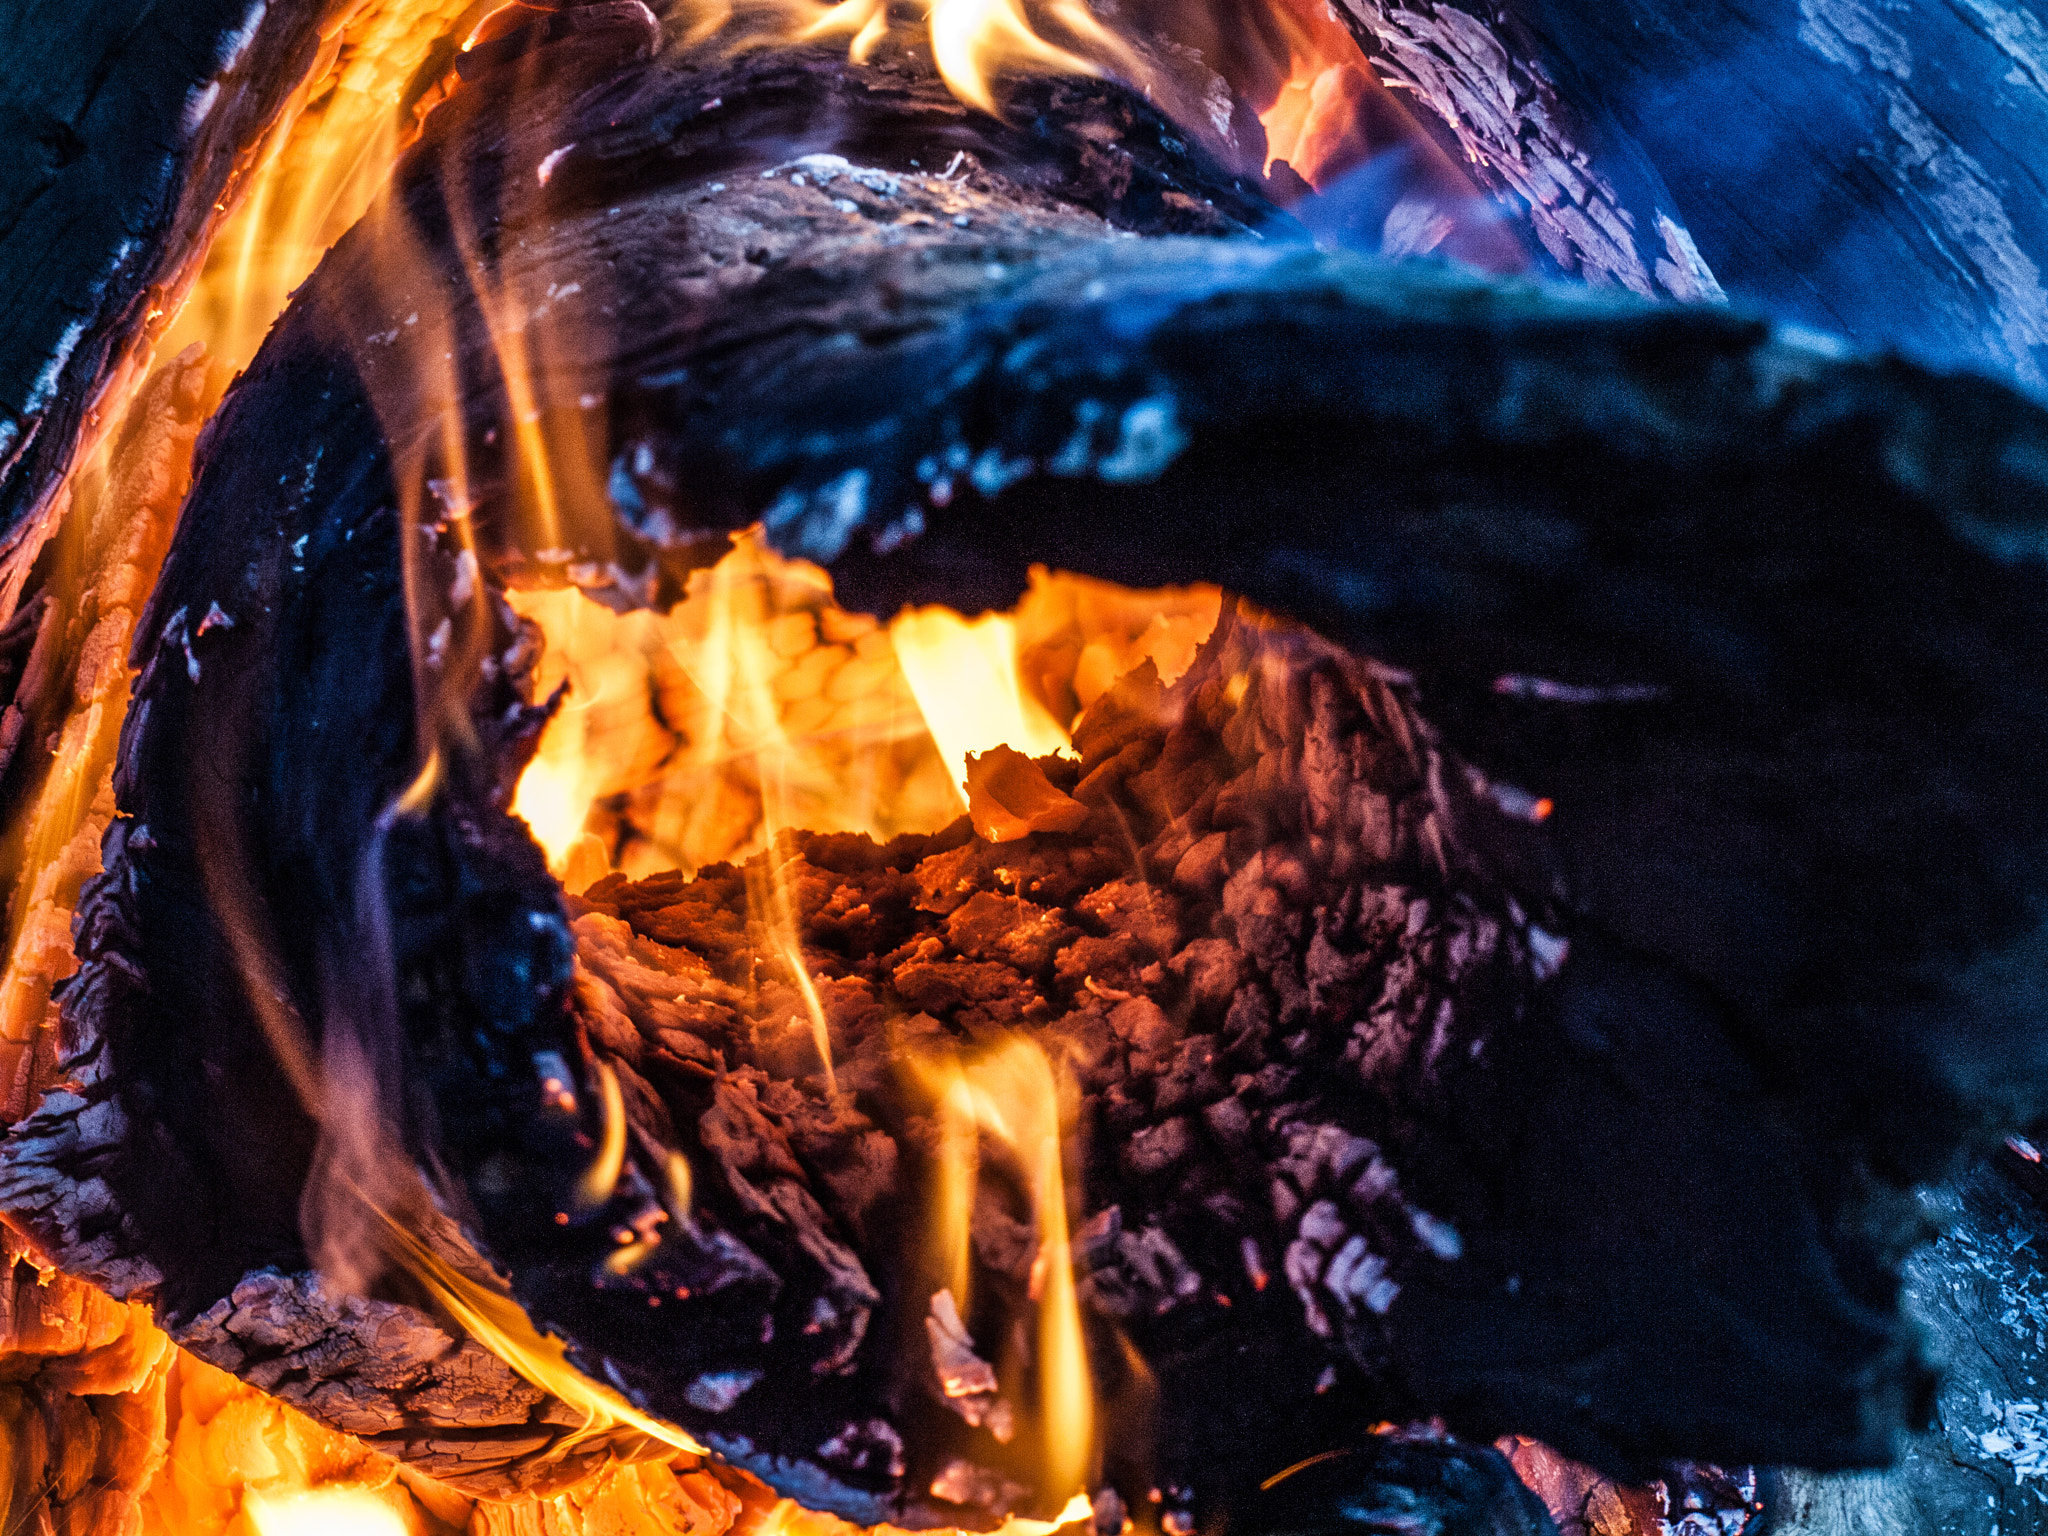 Olympus E-30 sample photo. Fire in a log photography